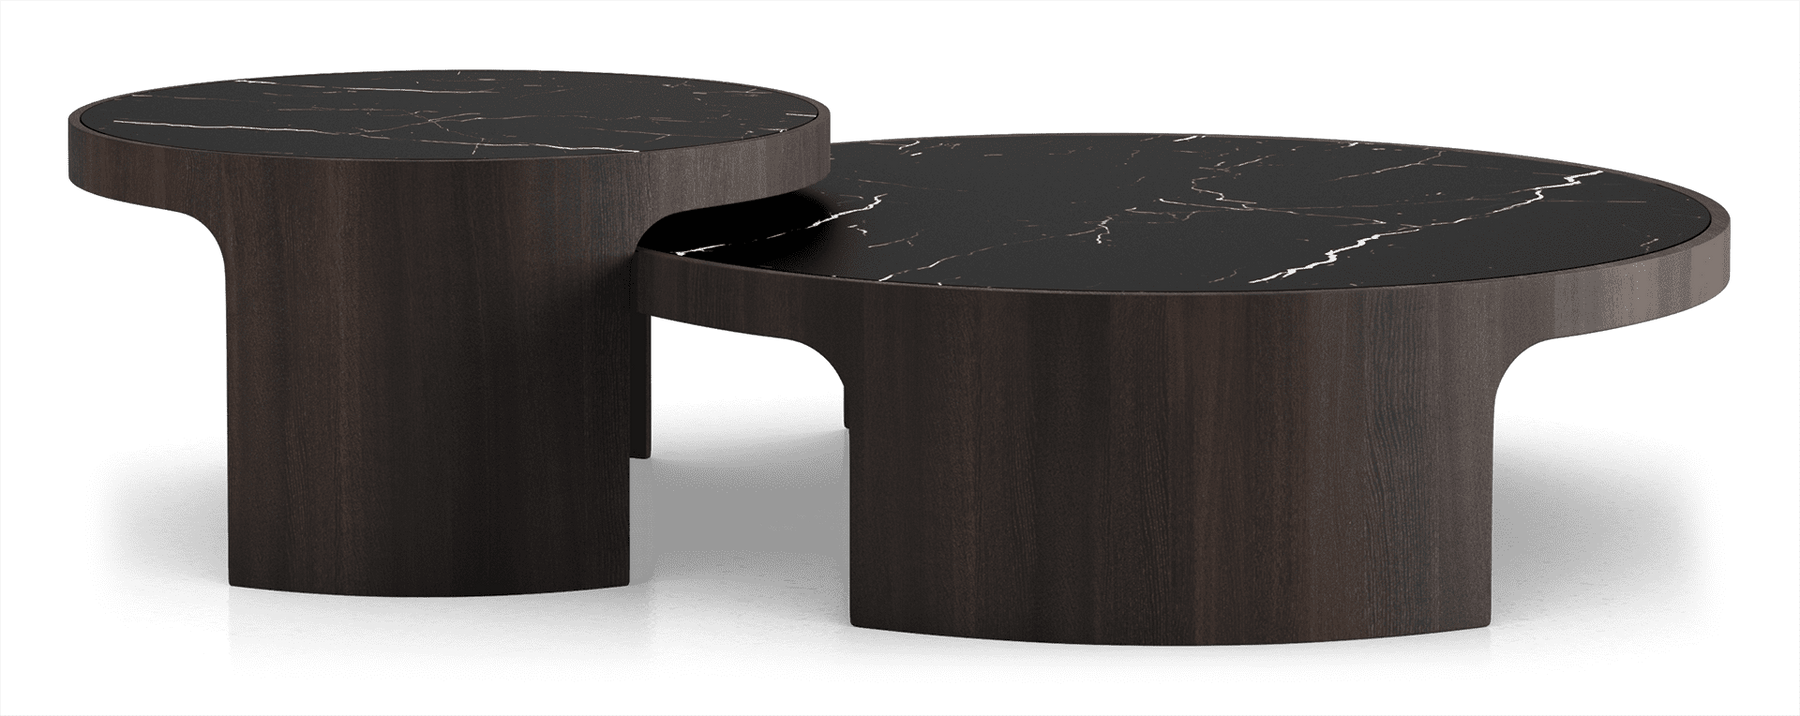 Oliver Coffee Tables